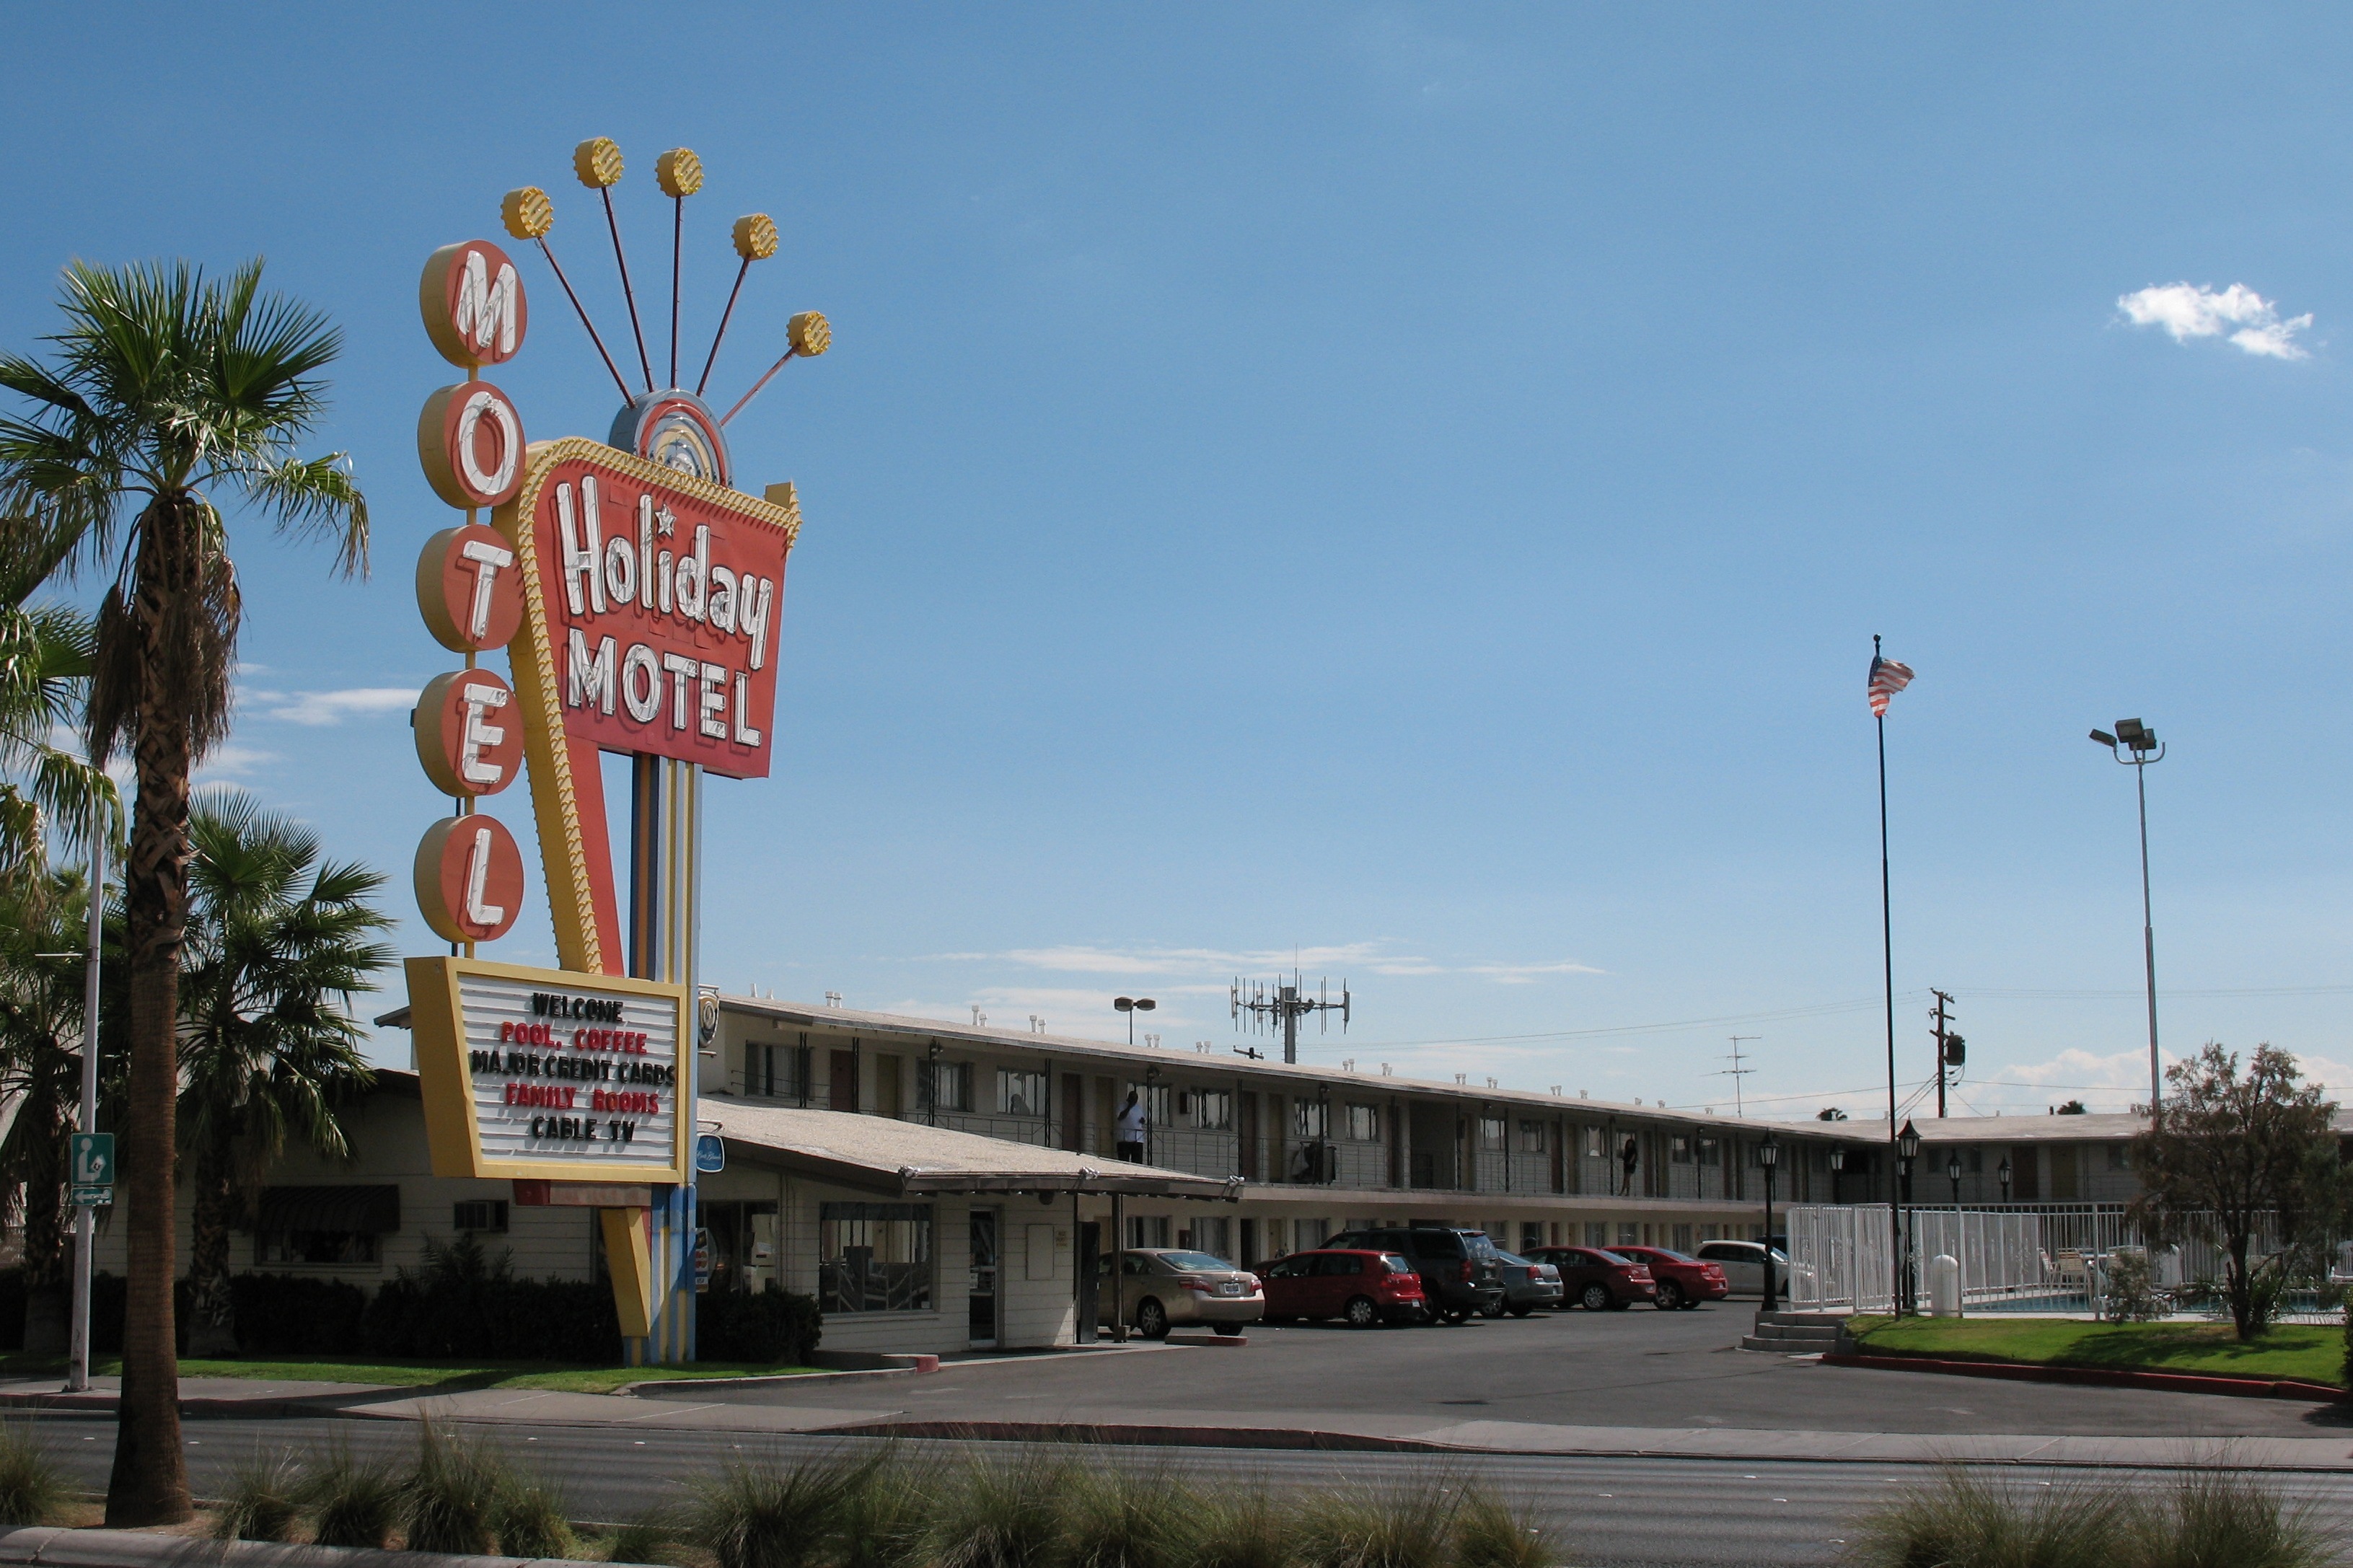 Introduction - Las Vegas Motels - Then and Now